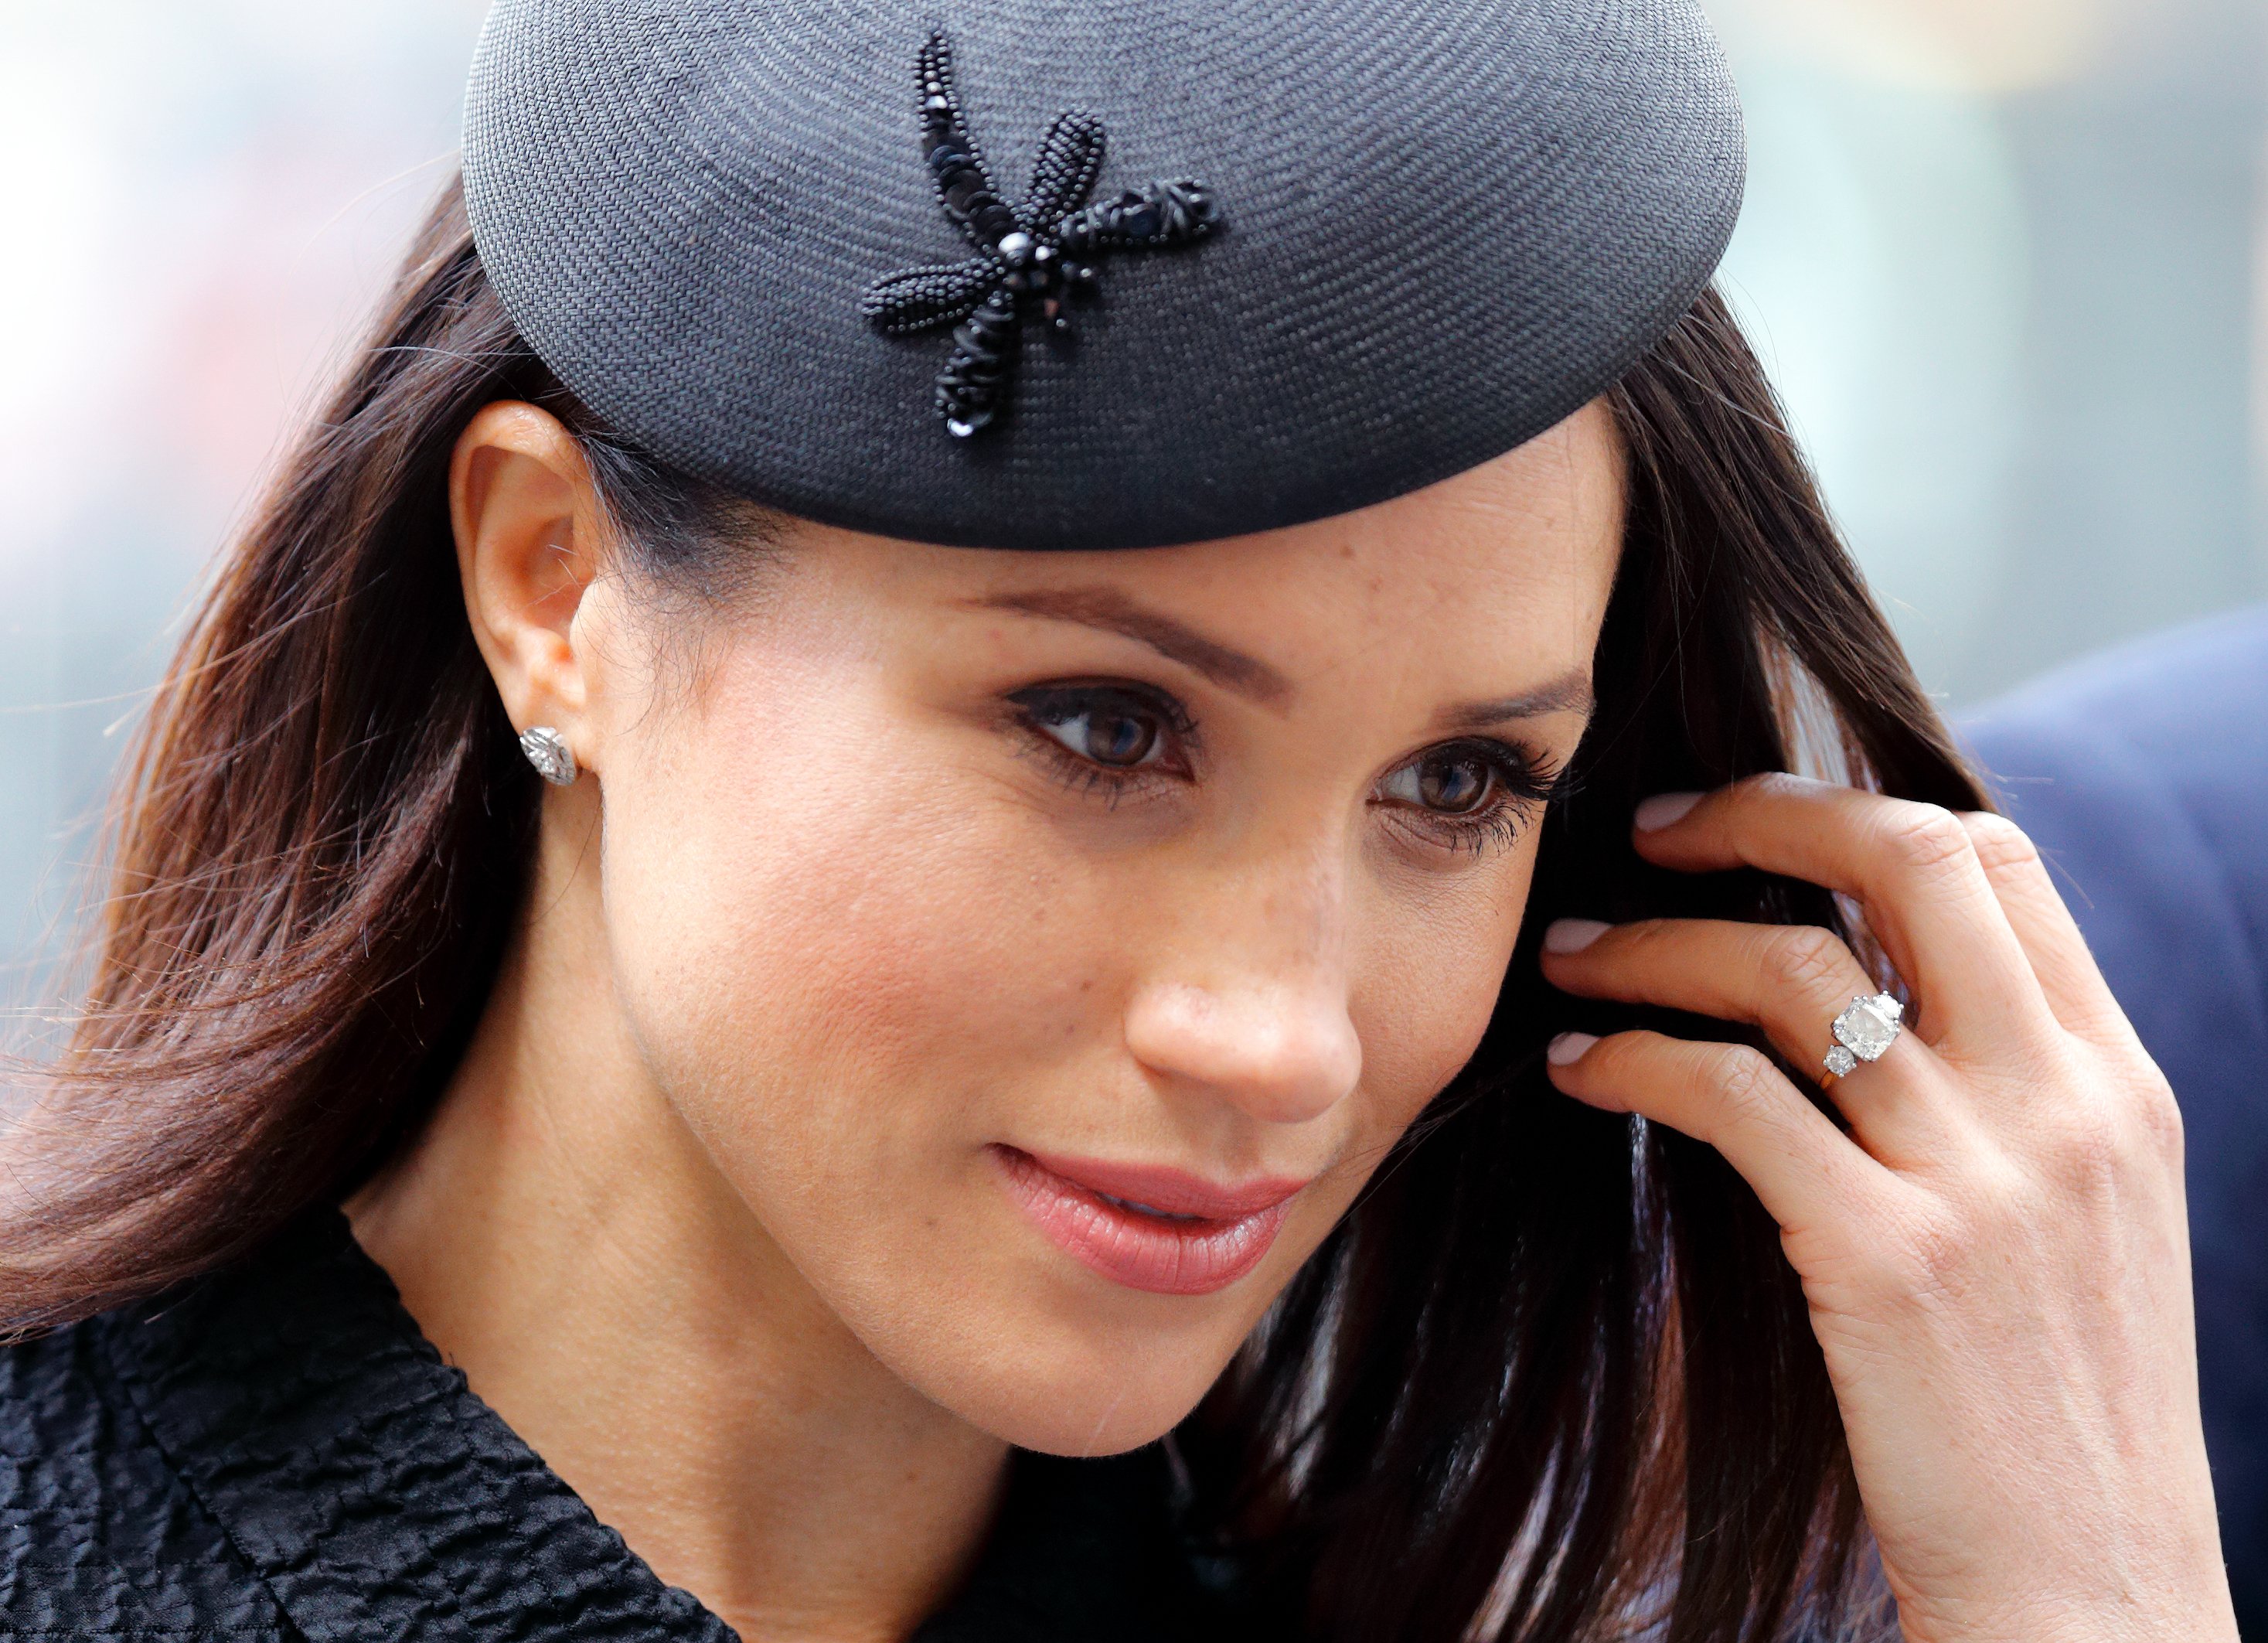 Meghan Markle attends an Anzac Day Service of Commemoration and Thanksgiving at Westminster Abbey on April 25, 2018 in London, England ┃Source: Getty Images